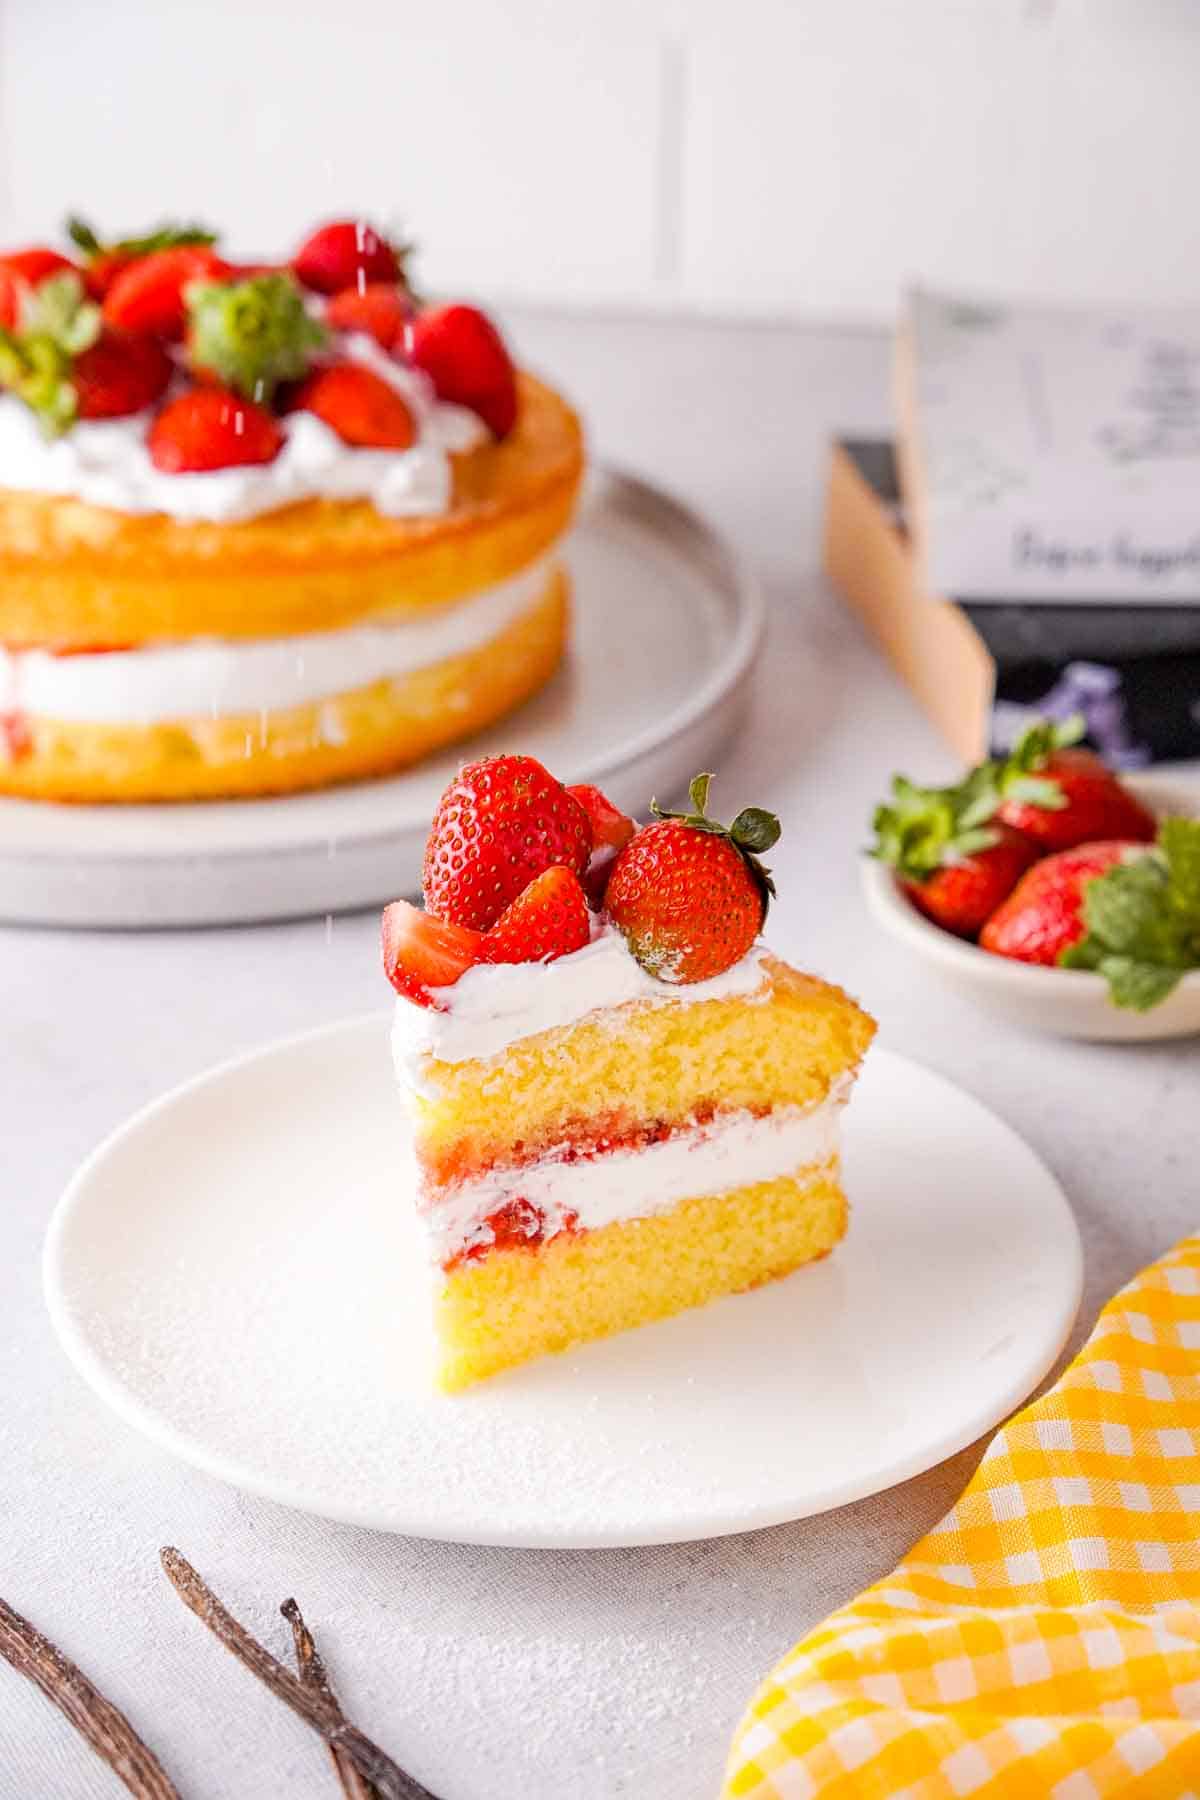 A slice of Victoria Sponge Cake with Balsamic Strawberries on a plate. The rest of the cake, as well as some additional fresh strawberries, can be seen in the background.